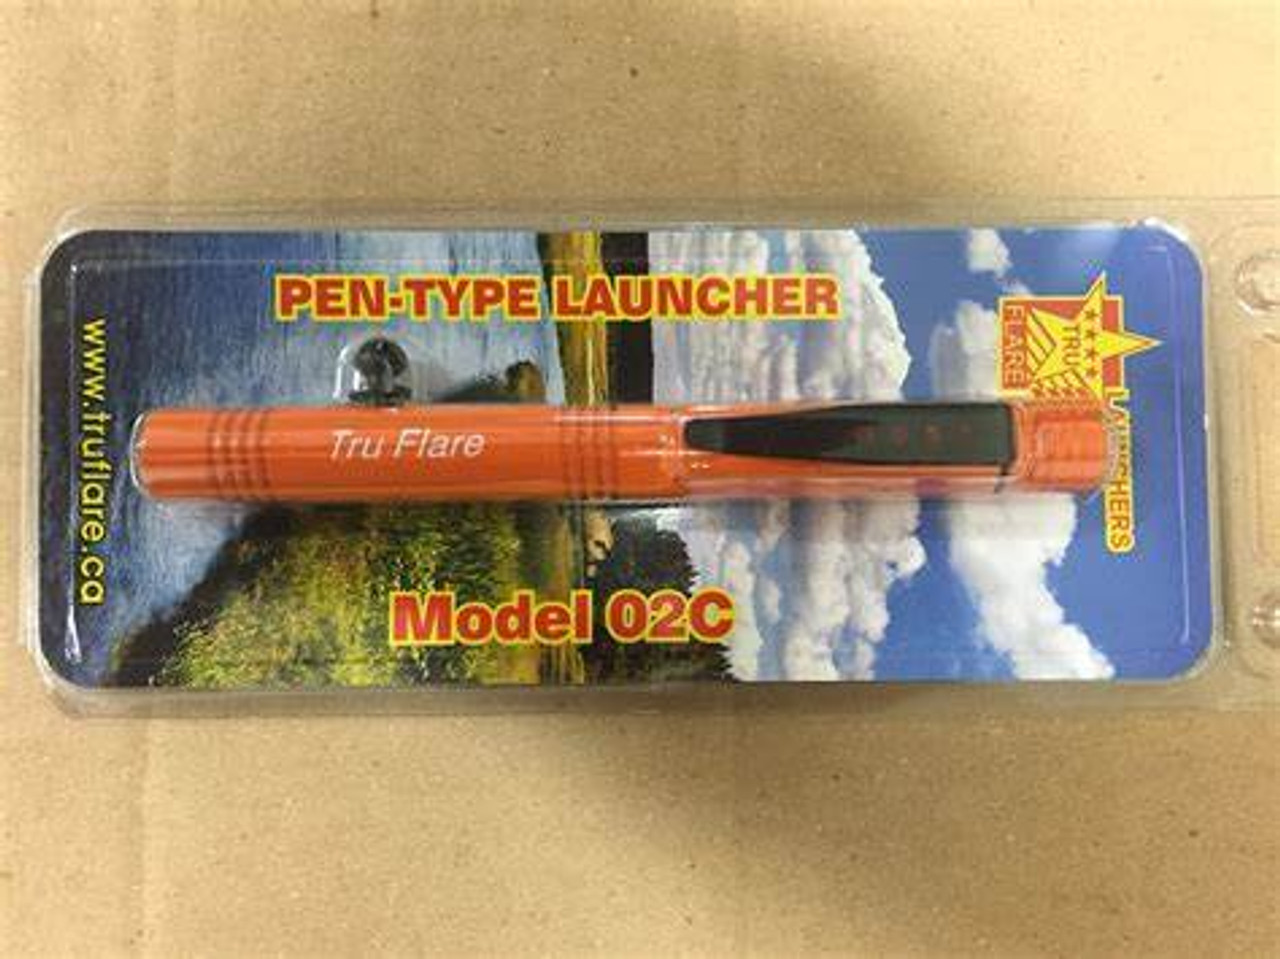 This multi-purpose launcher has the ability to deter animals from a distance and provide effective signaling with various flares. It’s small profile and compact cartridges easily slip into a pocket or bag for any wilderness occasion.

Outfitting the Pen Launcher with a Bear Banger or Whistle cartridge provides effective animal scarring while keeping you safe from a distance. Commonly used on bears, cougars, coyotes, birds, elk and other animals.

Need to get someones attention? The flare cartridges are visible for up to 3 km during the day and an impressive 12km at night.

If you are going to pack something for the wilderness it’s valuable to have multiple purposes. The Pen Launcher is a tool with a variety of attachments and uses in a compact design. The Thumb Level Model works by pre-cocking the firing pin into a safety notch allowing for simple one handed operation.

Specifications

Works with 15mm center fire cartridges only
Durable metal design
Thumb leaver firing and spring loaded
Safety notch
Design allows to be fired with one hand
Light weight: 40g (1.4oz)
Compact size: Length- 11.8cm (4.7″) Diameter- 1.1cm (0.4″)